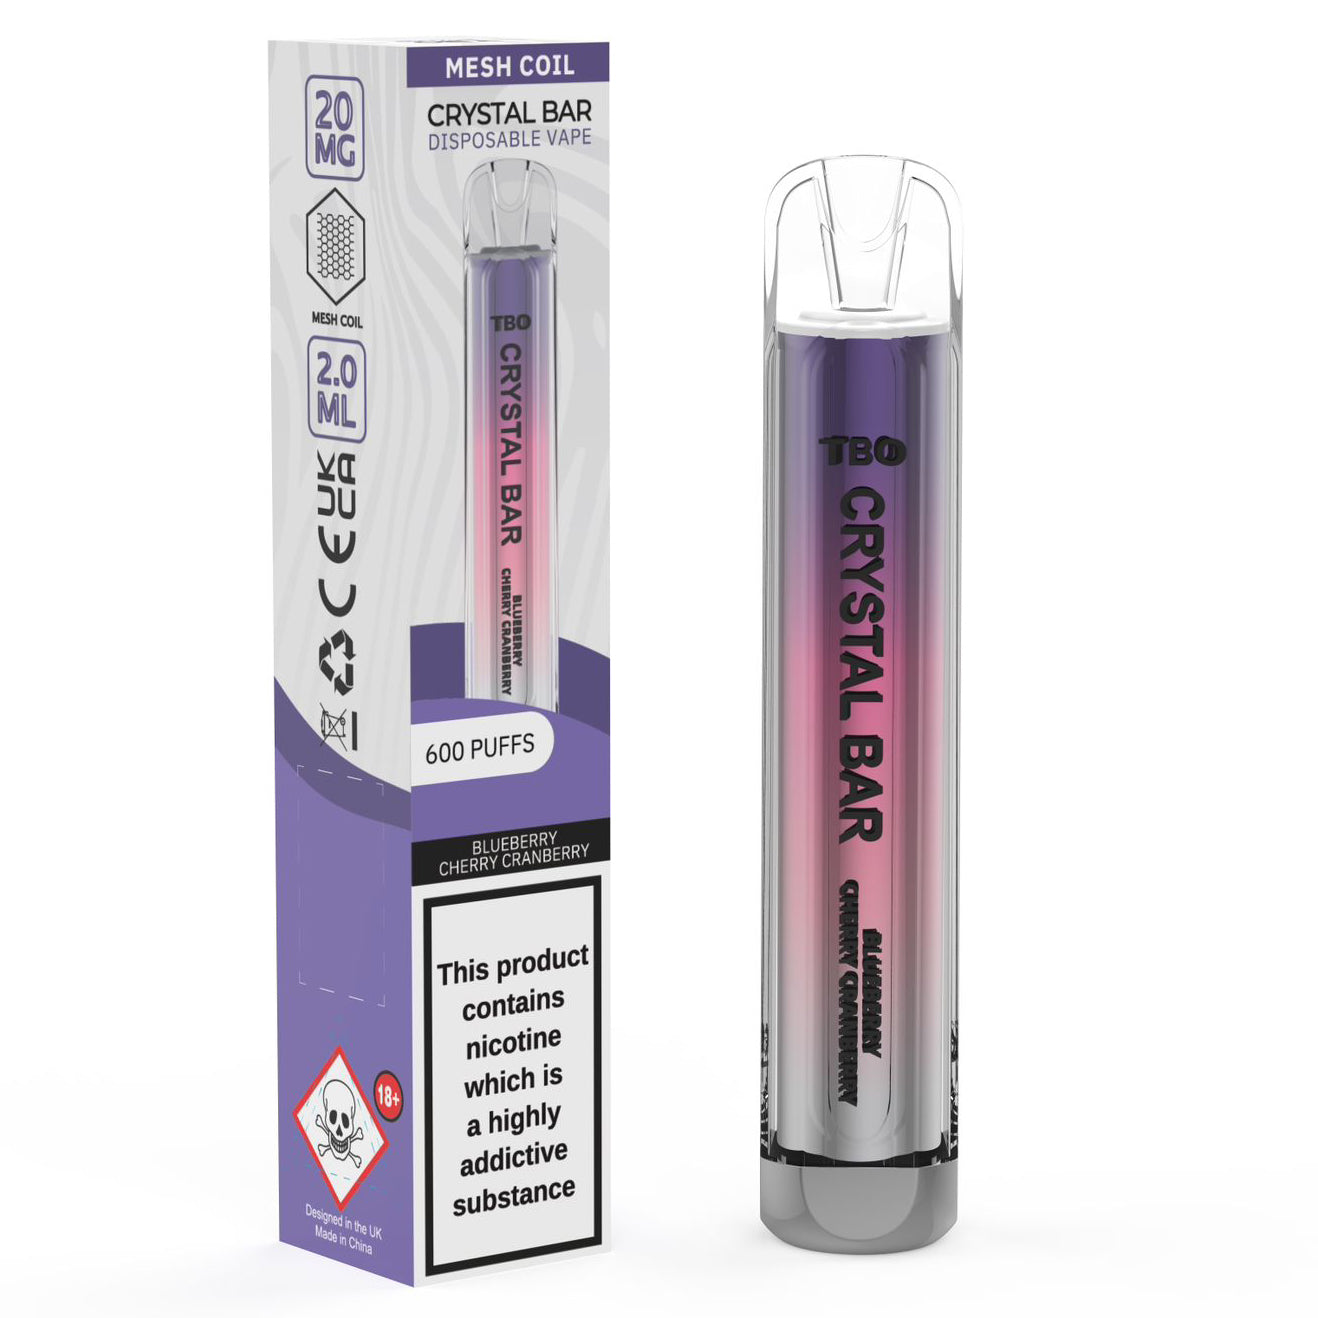 TBO Crystal Bar Disposable Vape Device - Blueberry Cherry Cranberry